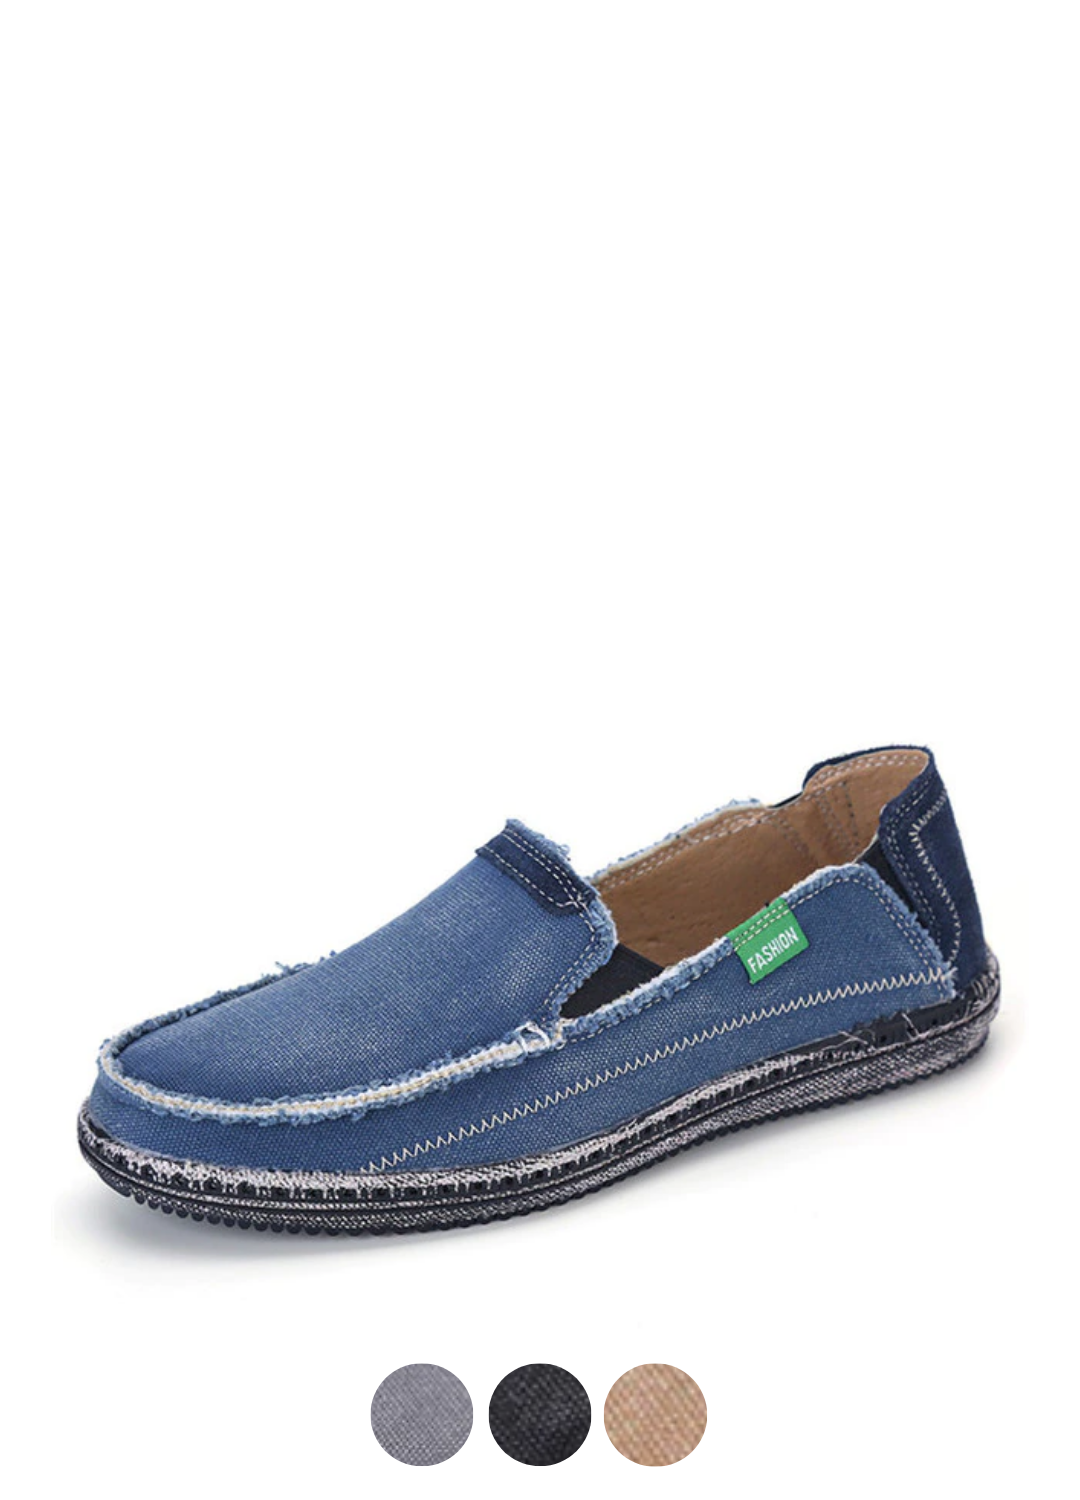 Nathan Men's Loafers Fashion Shoes | Ultrasellershoes.com – USS® Shoes